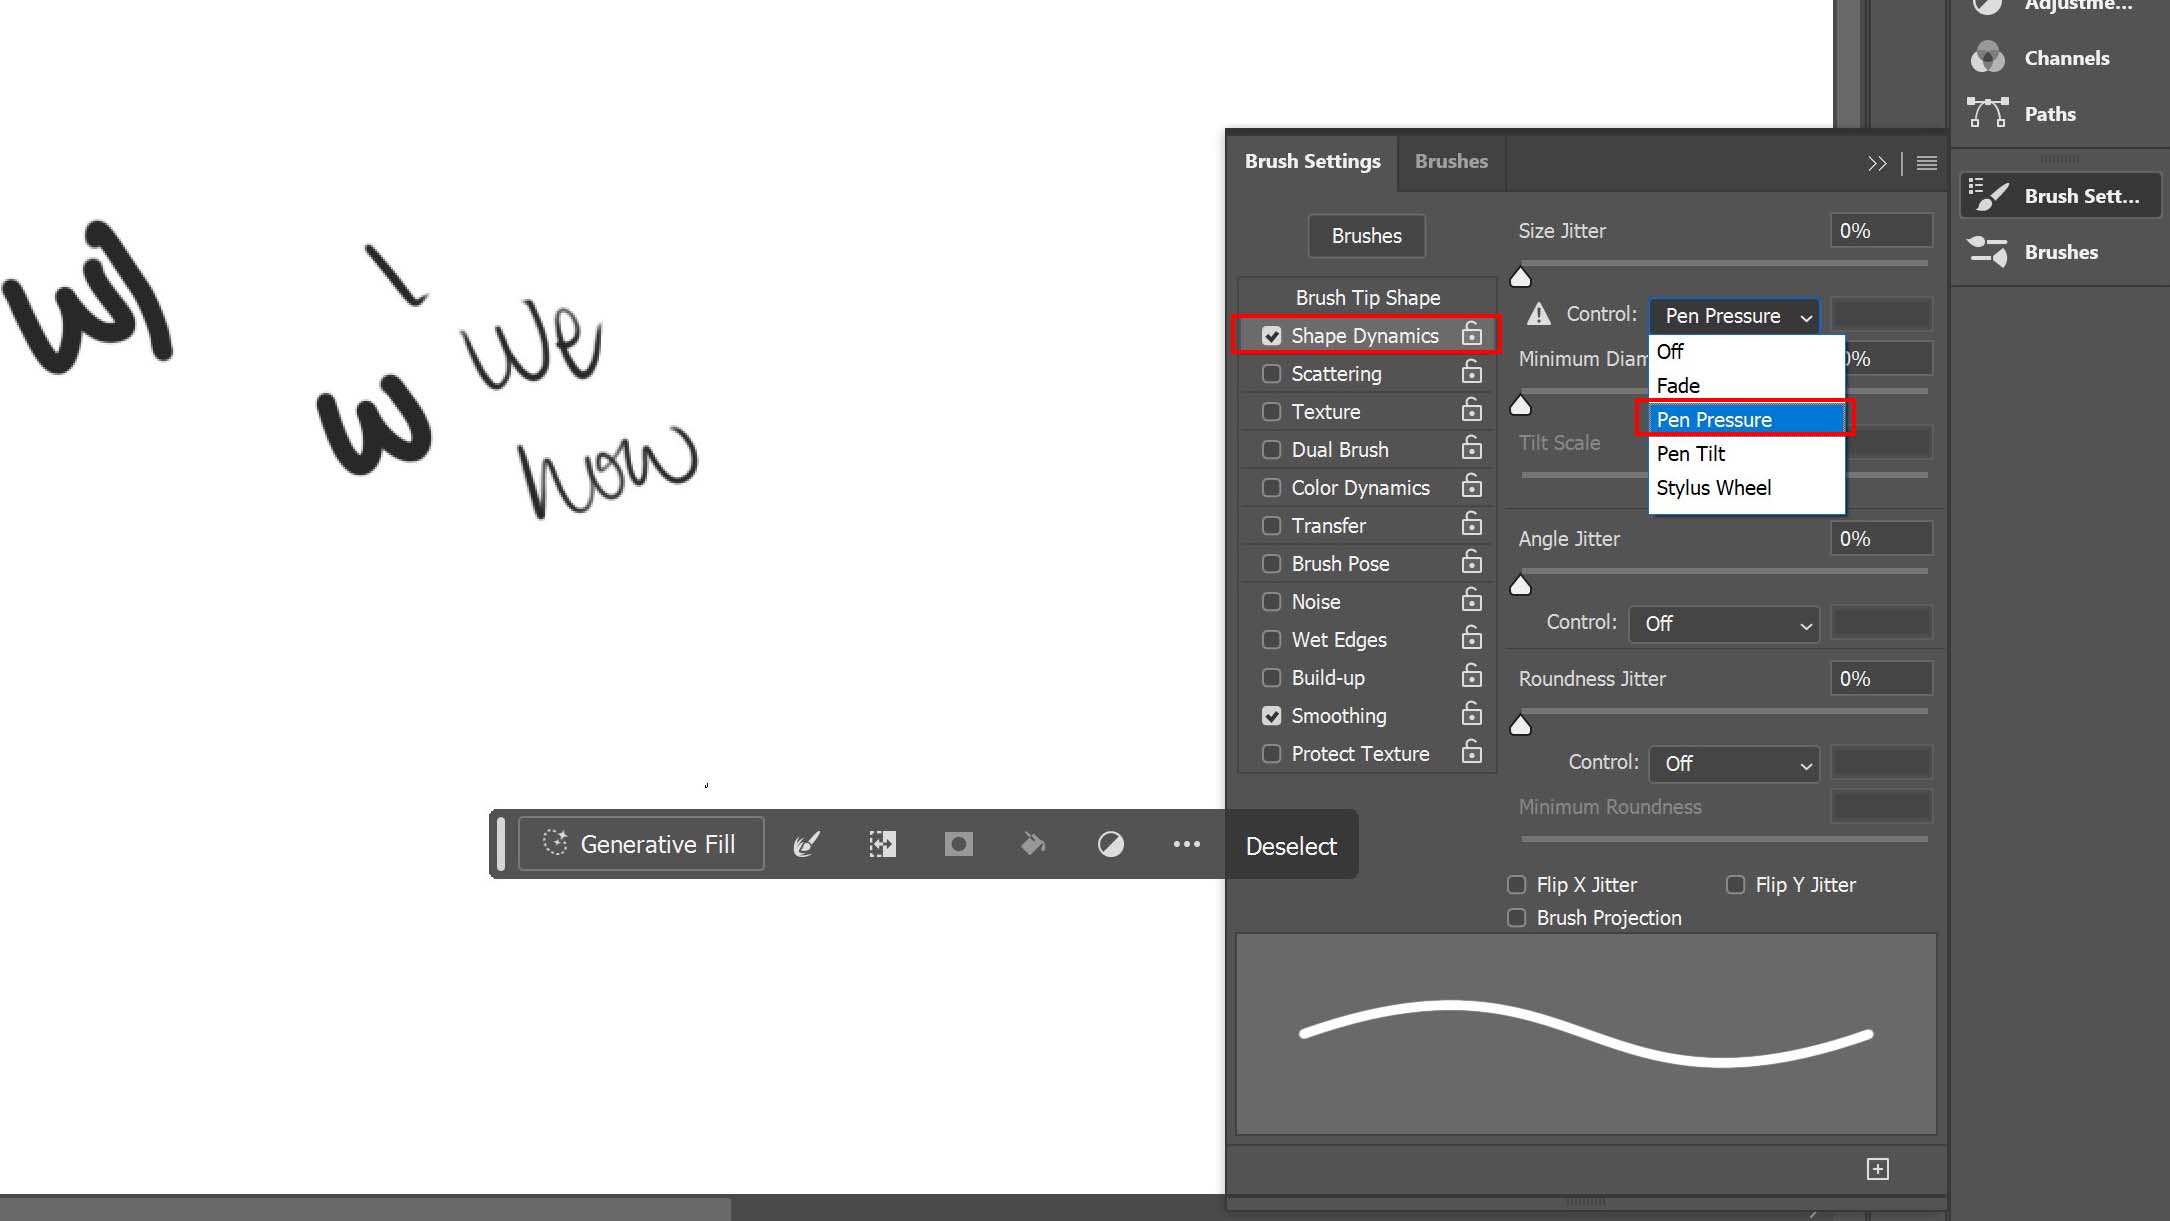 Adobe Photoshop Brush Settings for drawing with a Pen display.